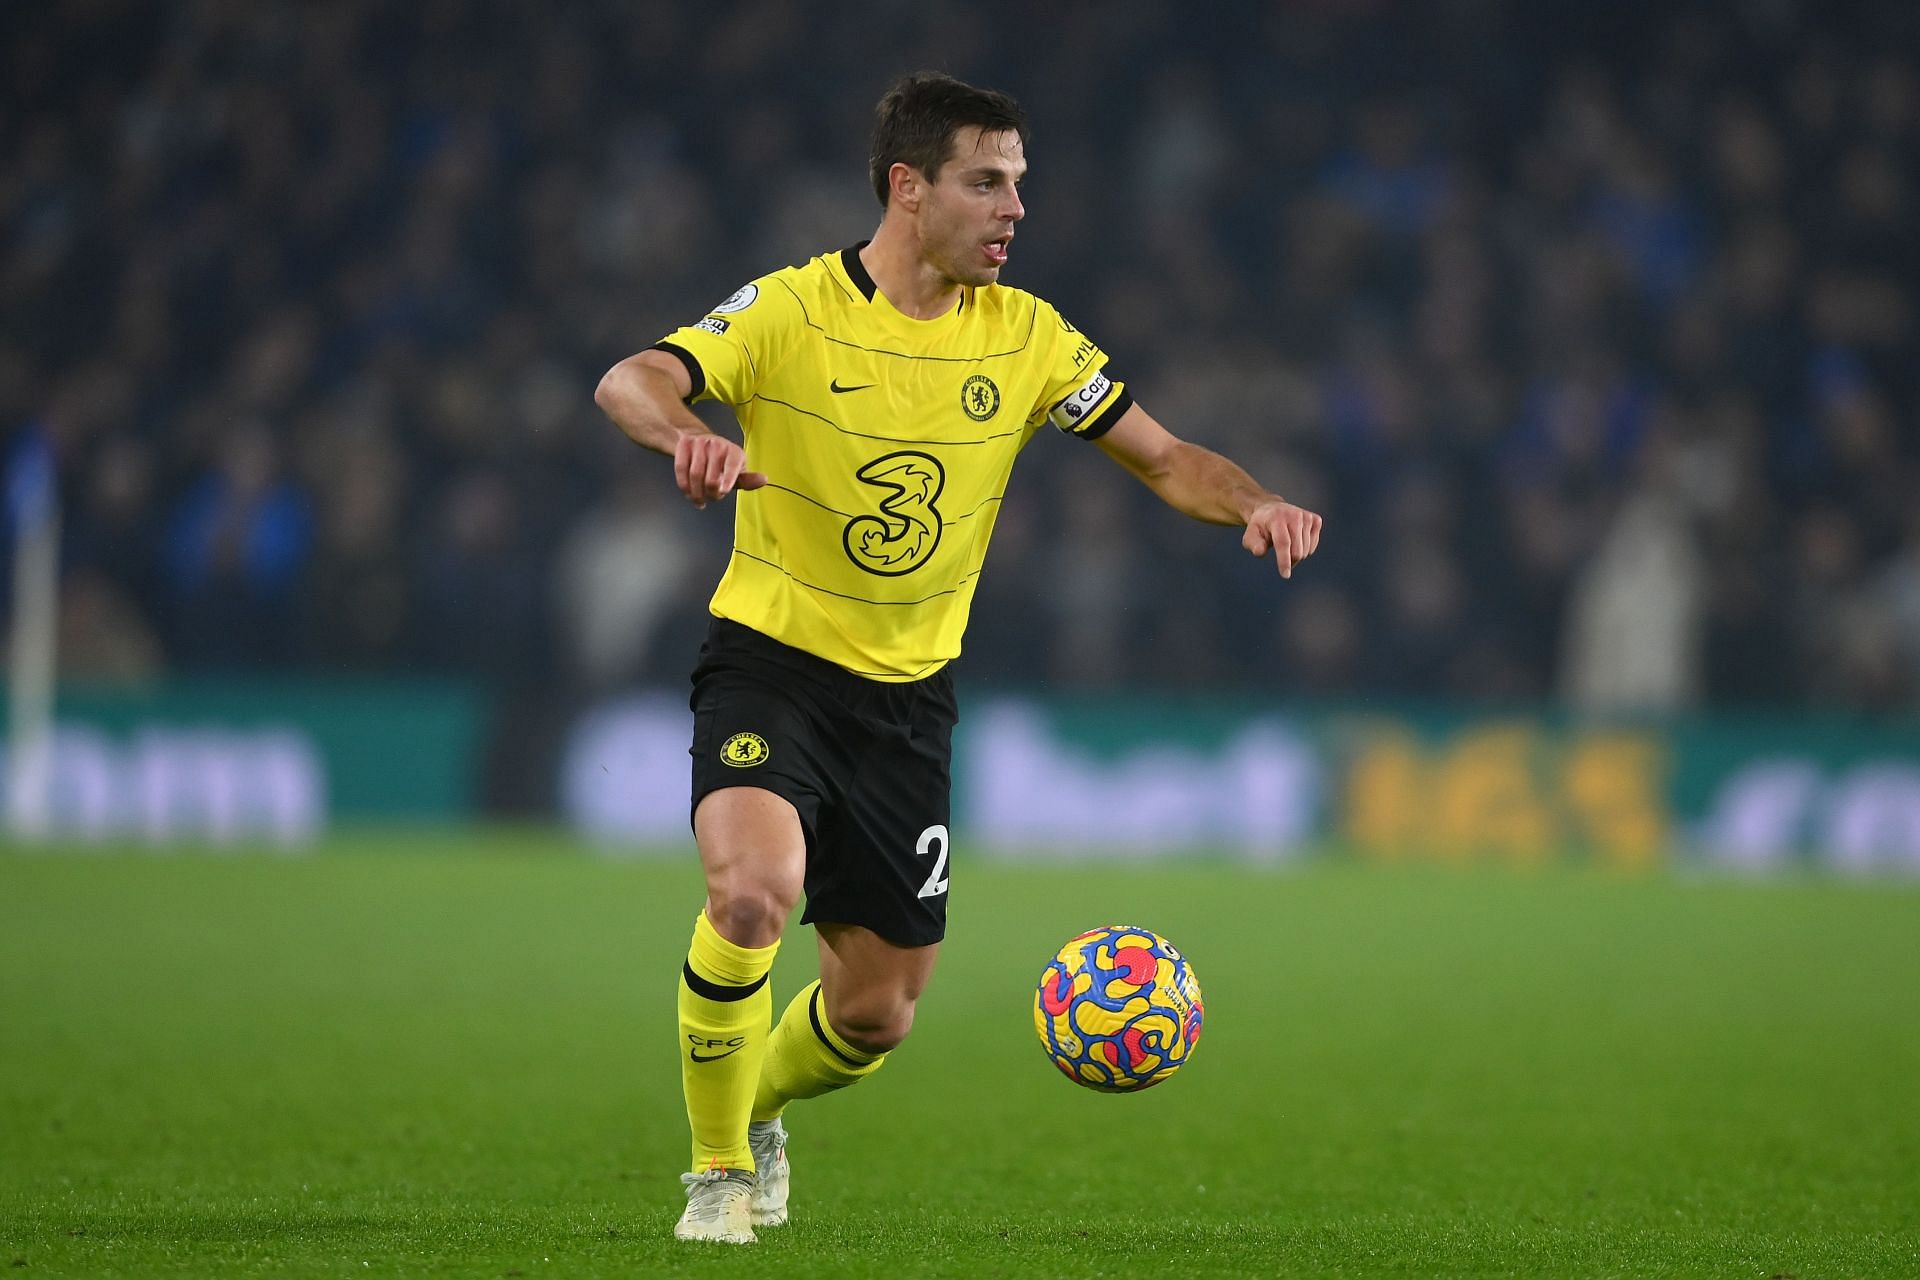 Cesar Azpilicueta has urged his teammates to give everything on the pitch to win the Club World Cup